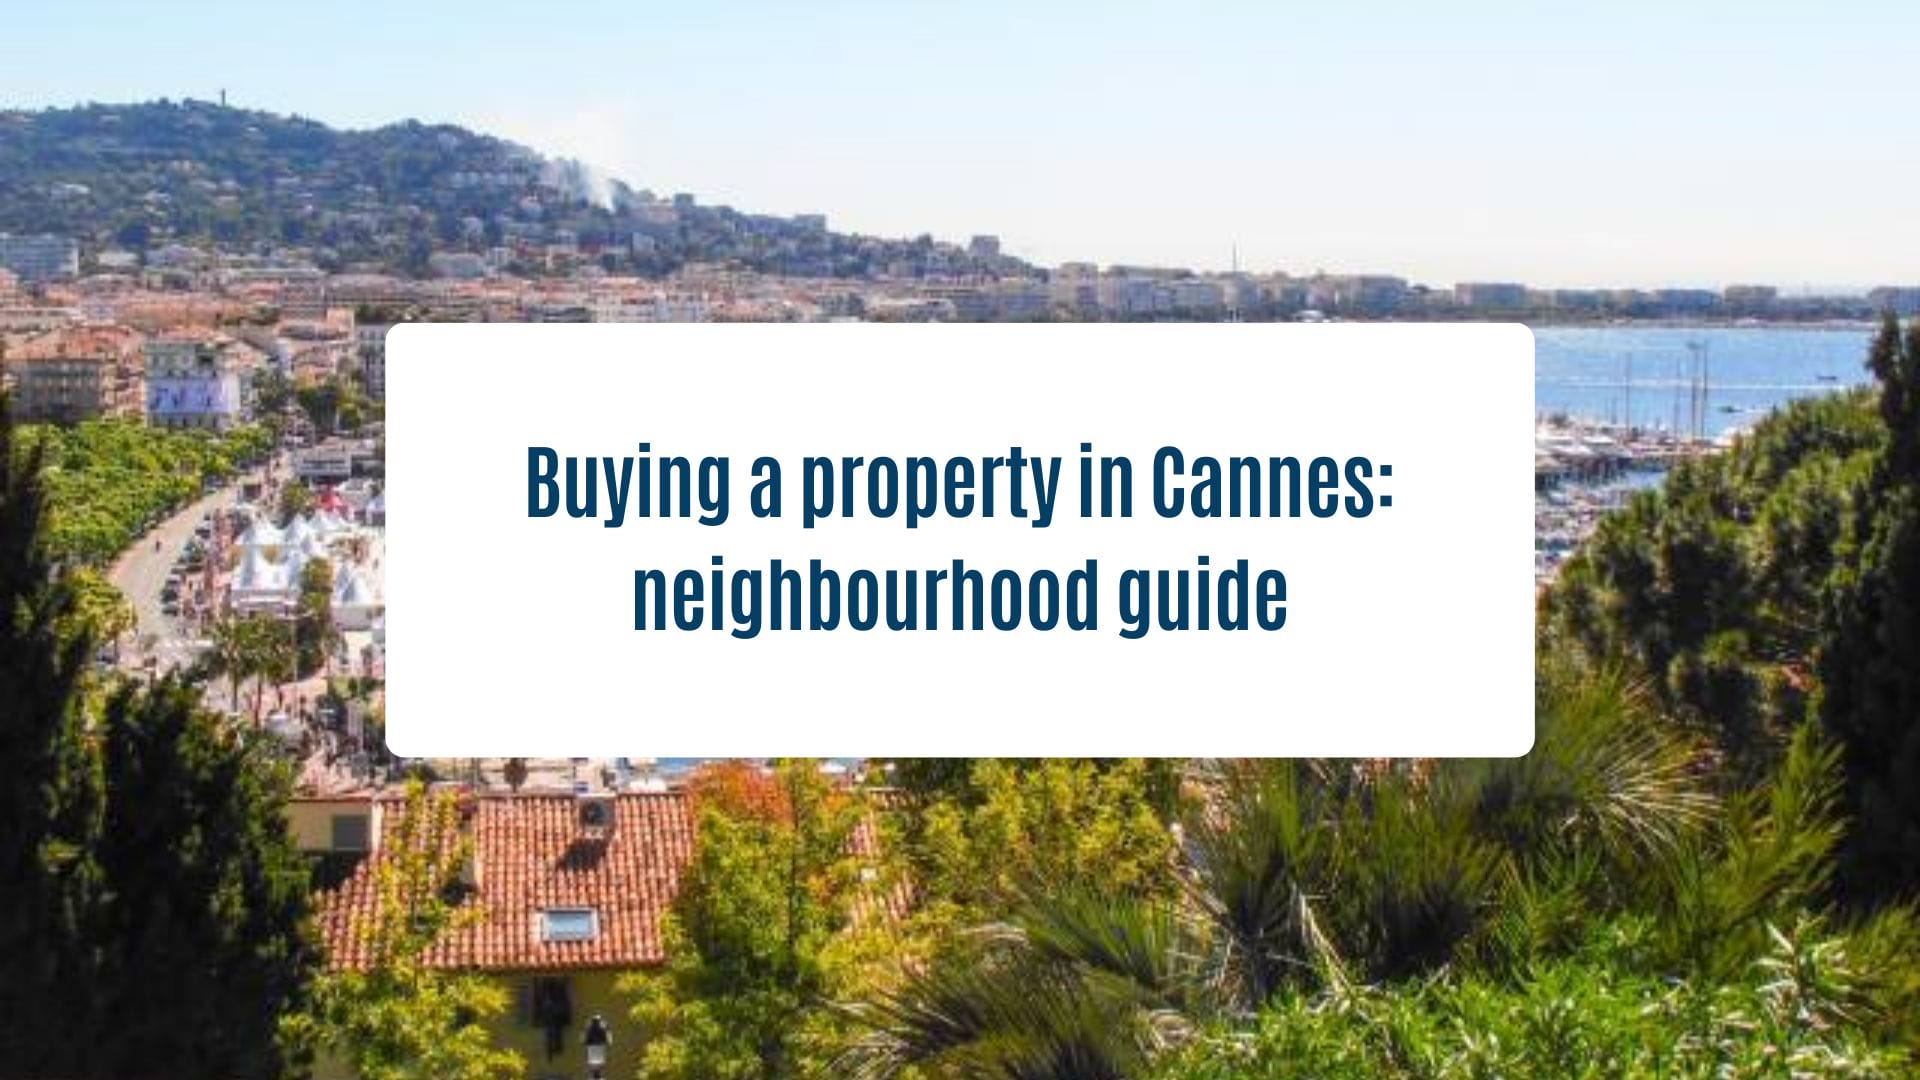 News Olam Properties - Buying a property in Cannes: neighbourhood guide